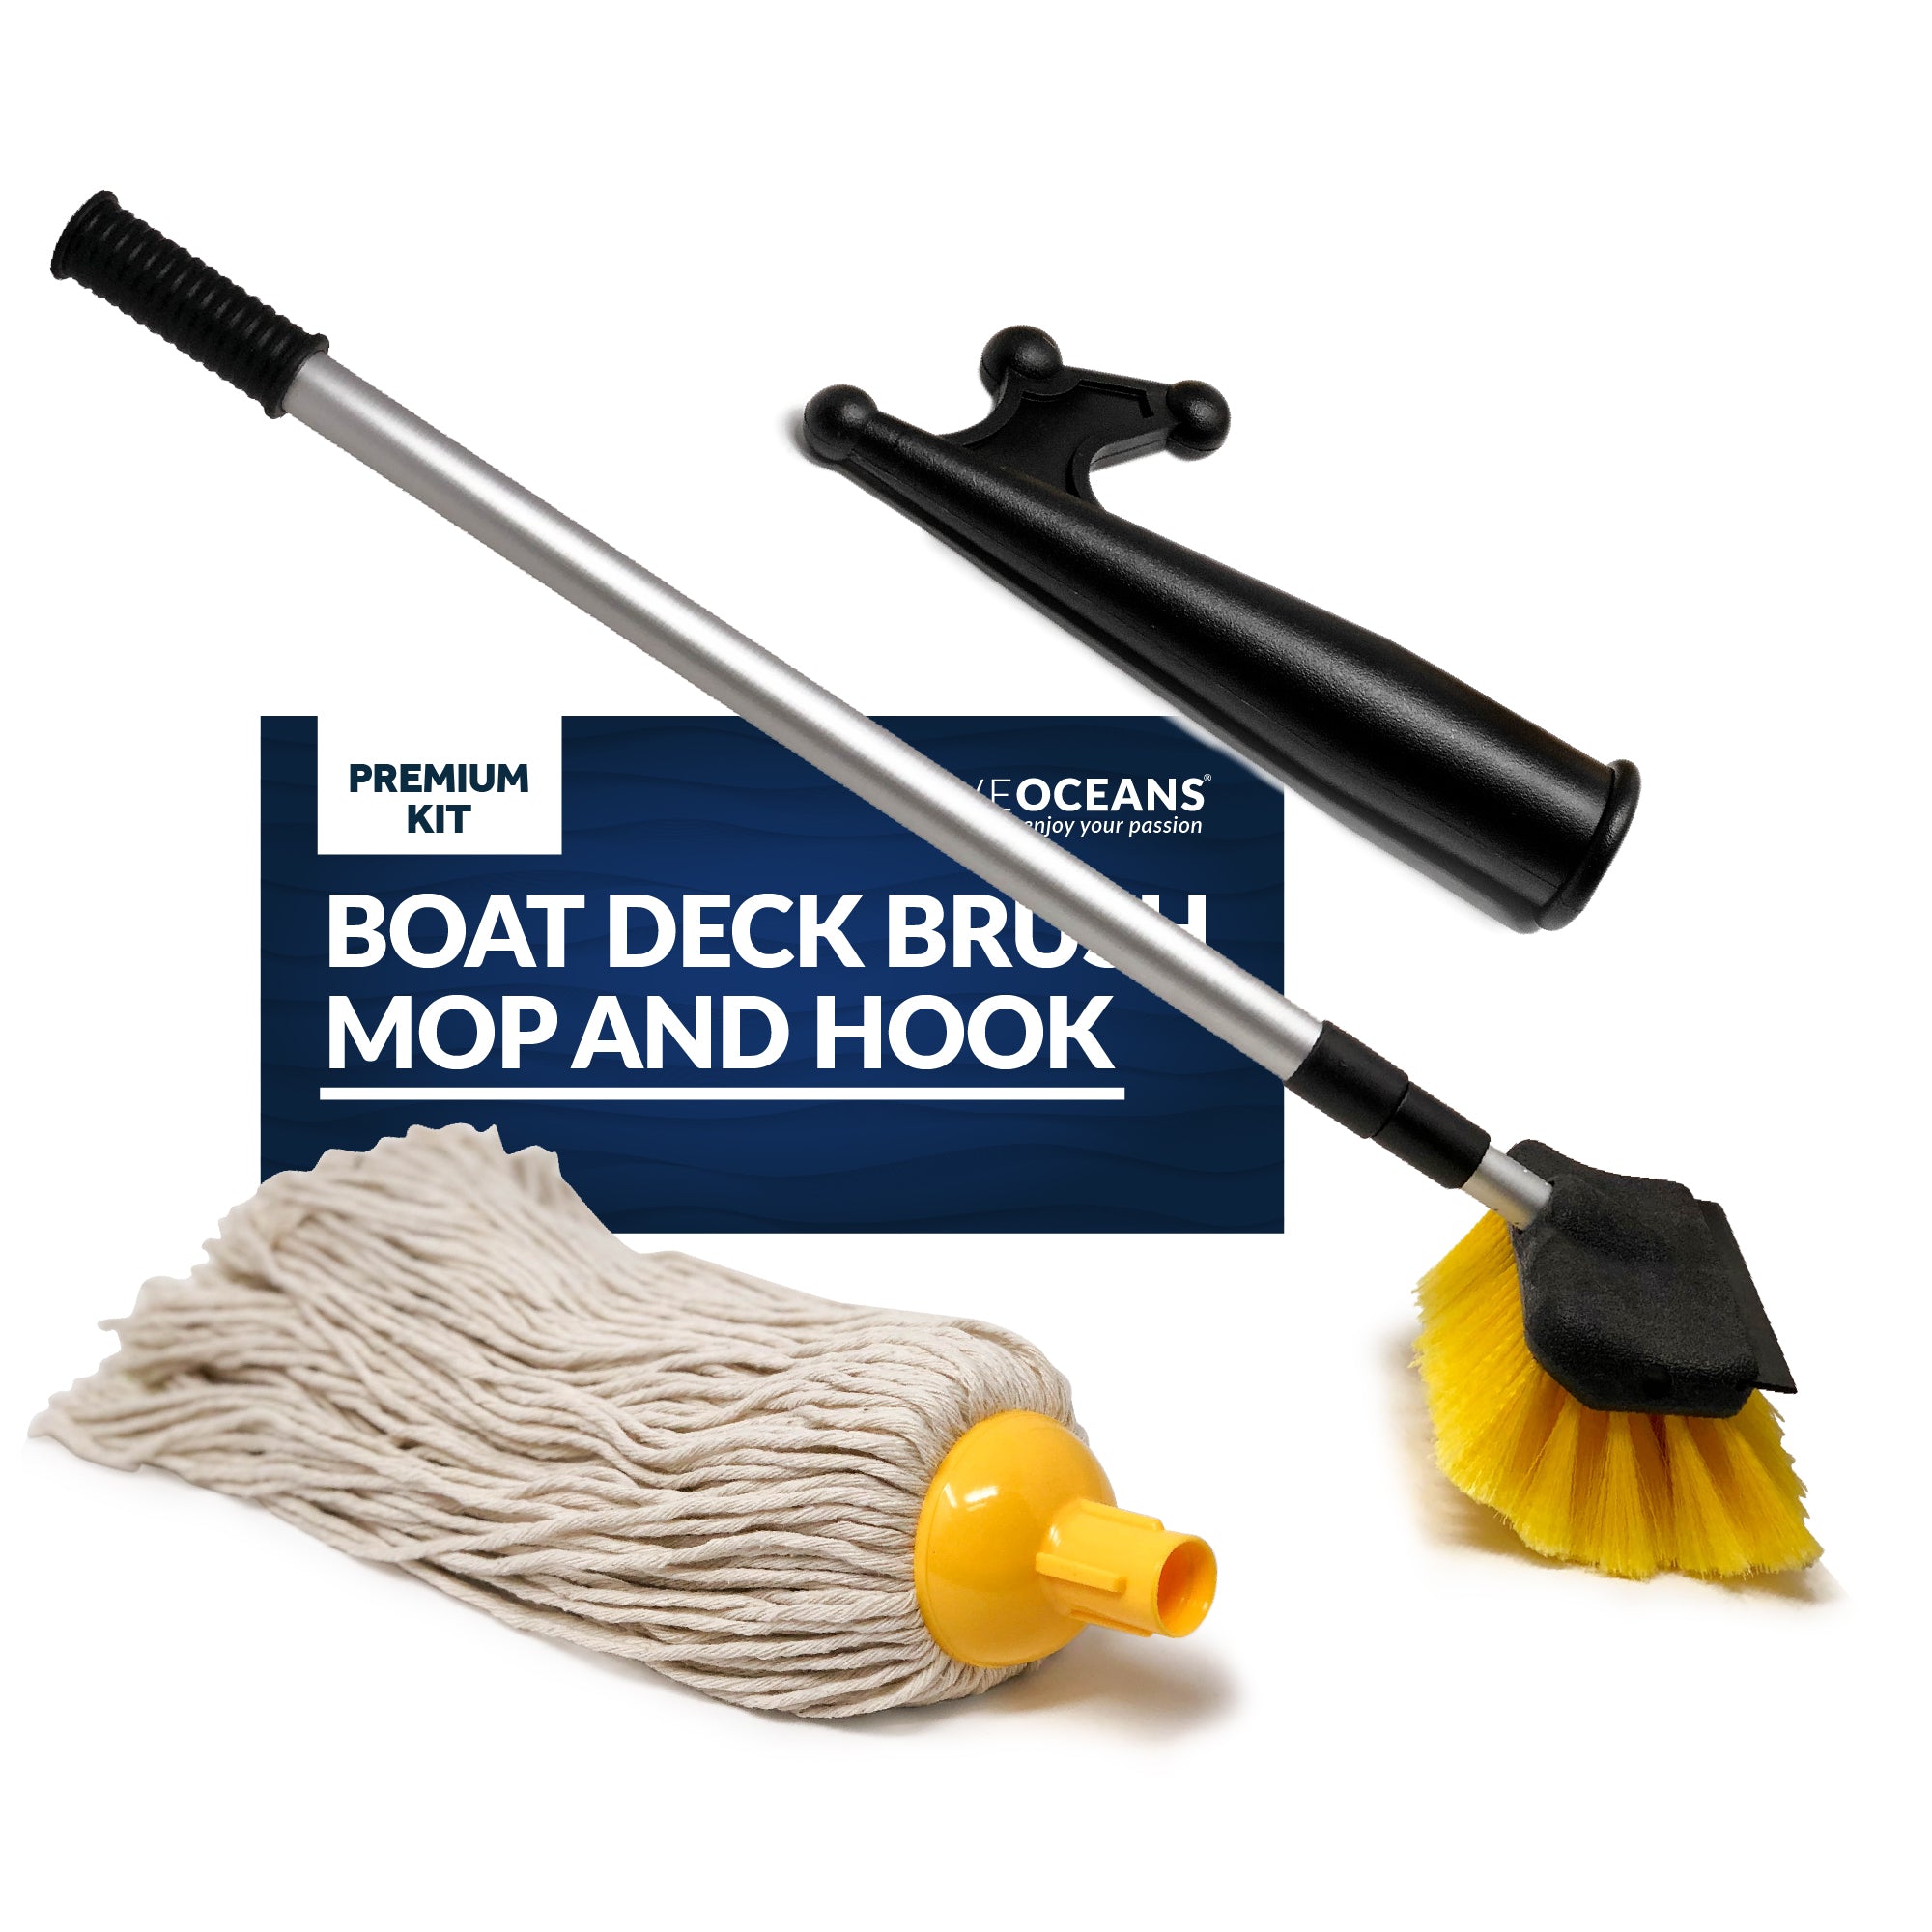 Five Oceans Deluxe Deck Kit w/ Brush, Mop, and Hook Fo-4264